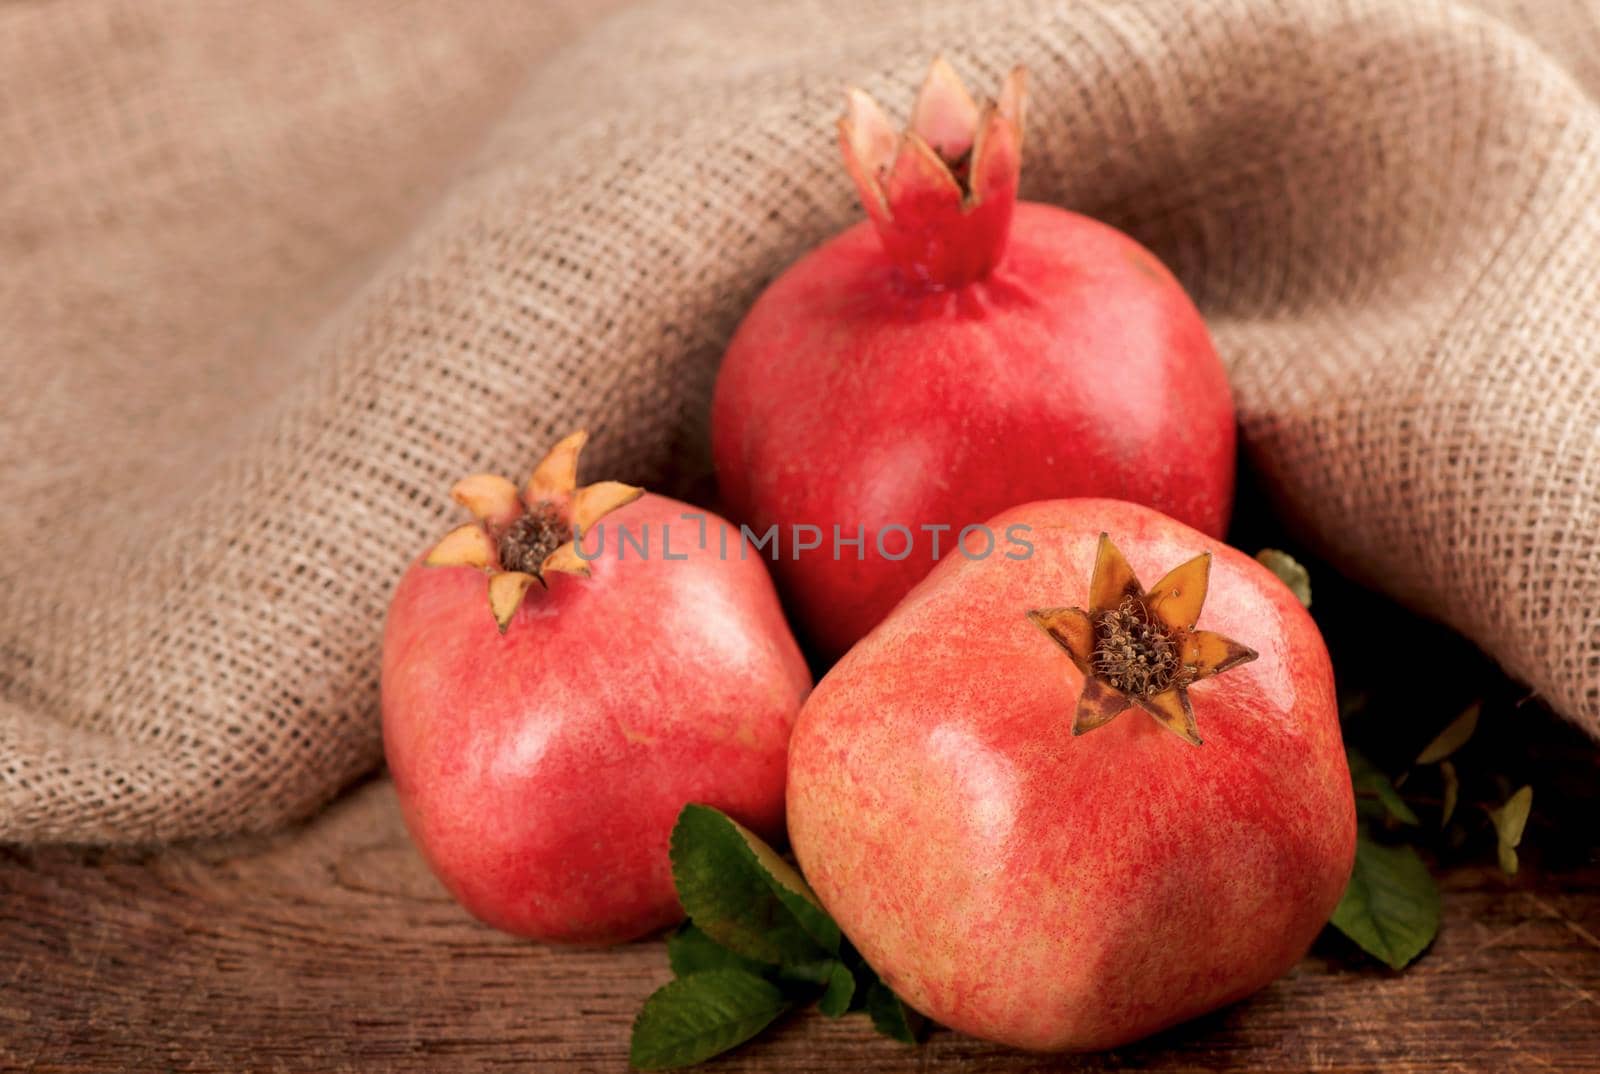 ripe pomegranate with leaves on a wooden board by aprilphoto